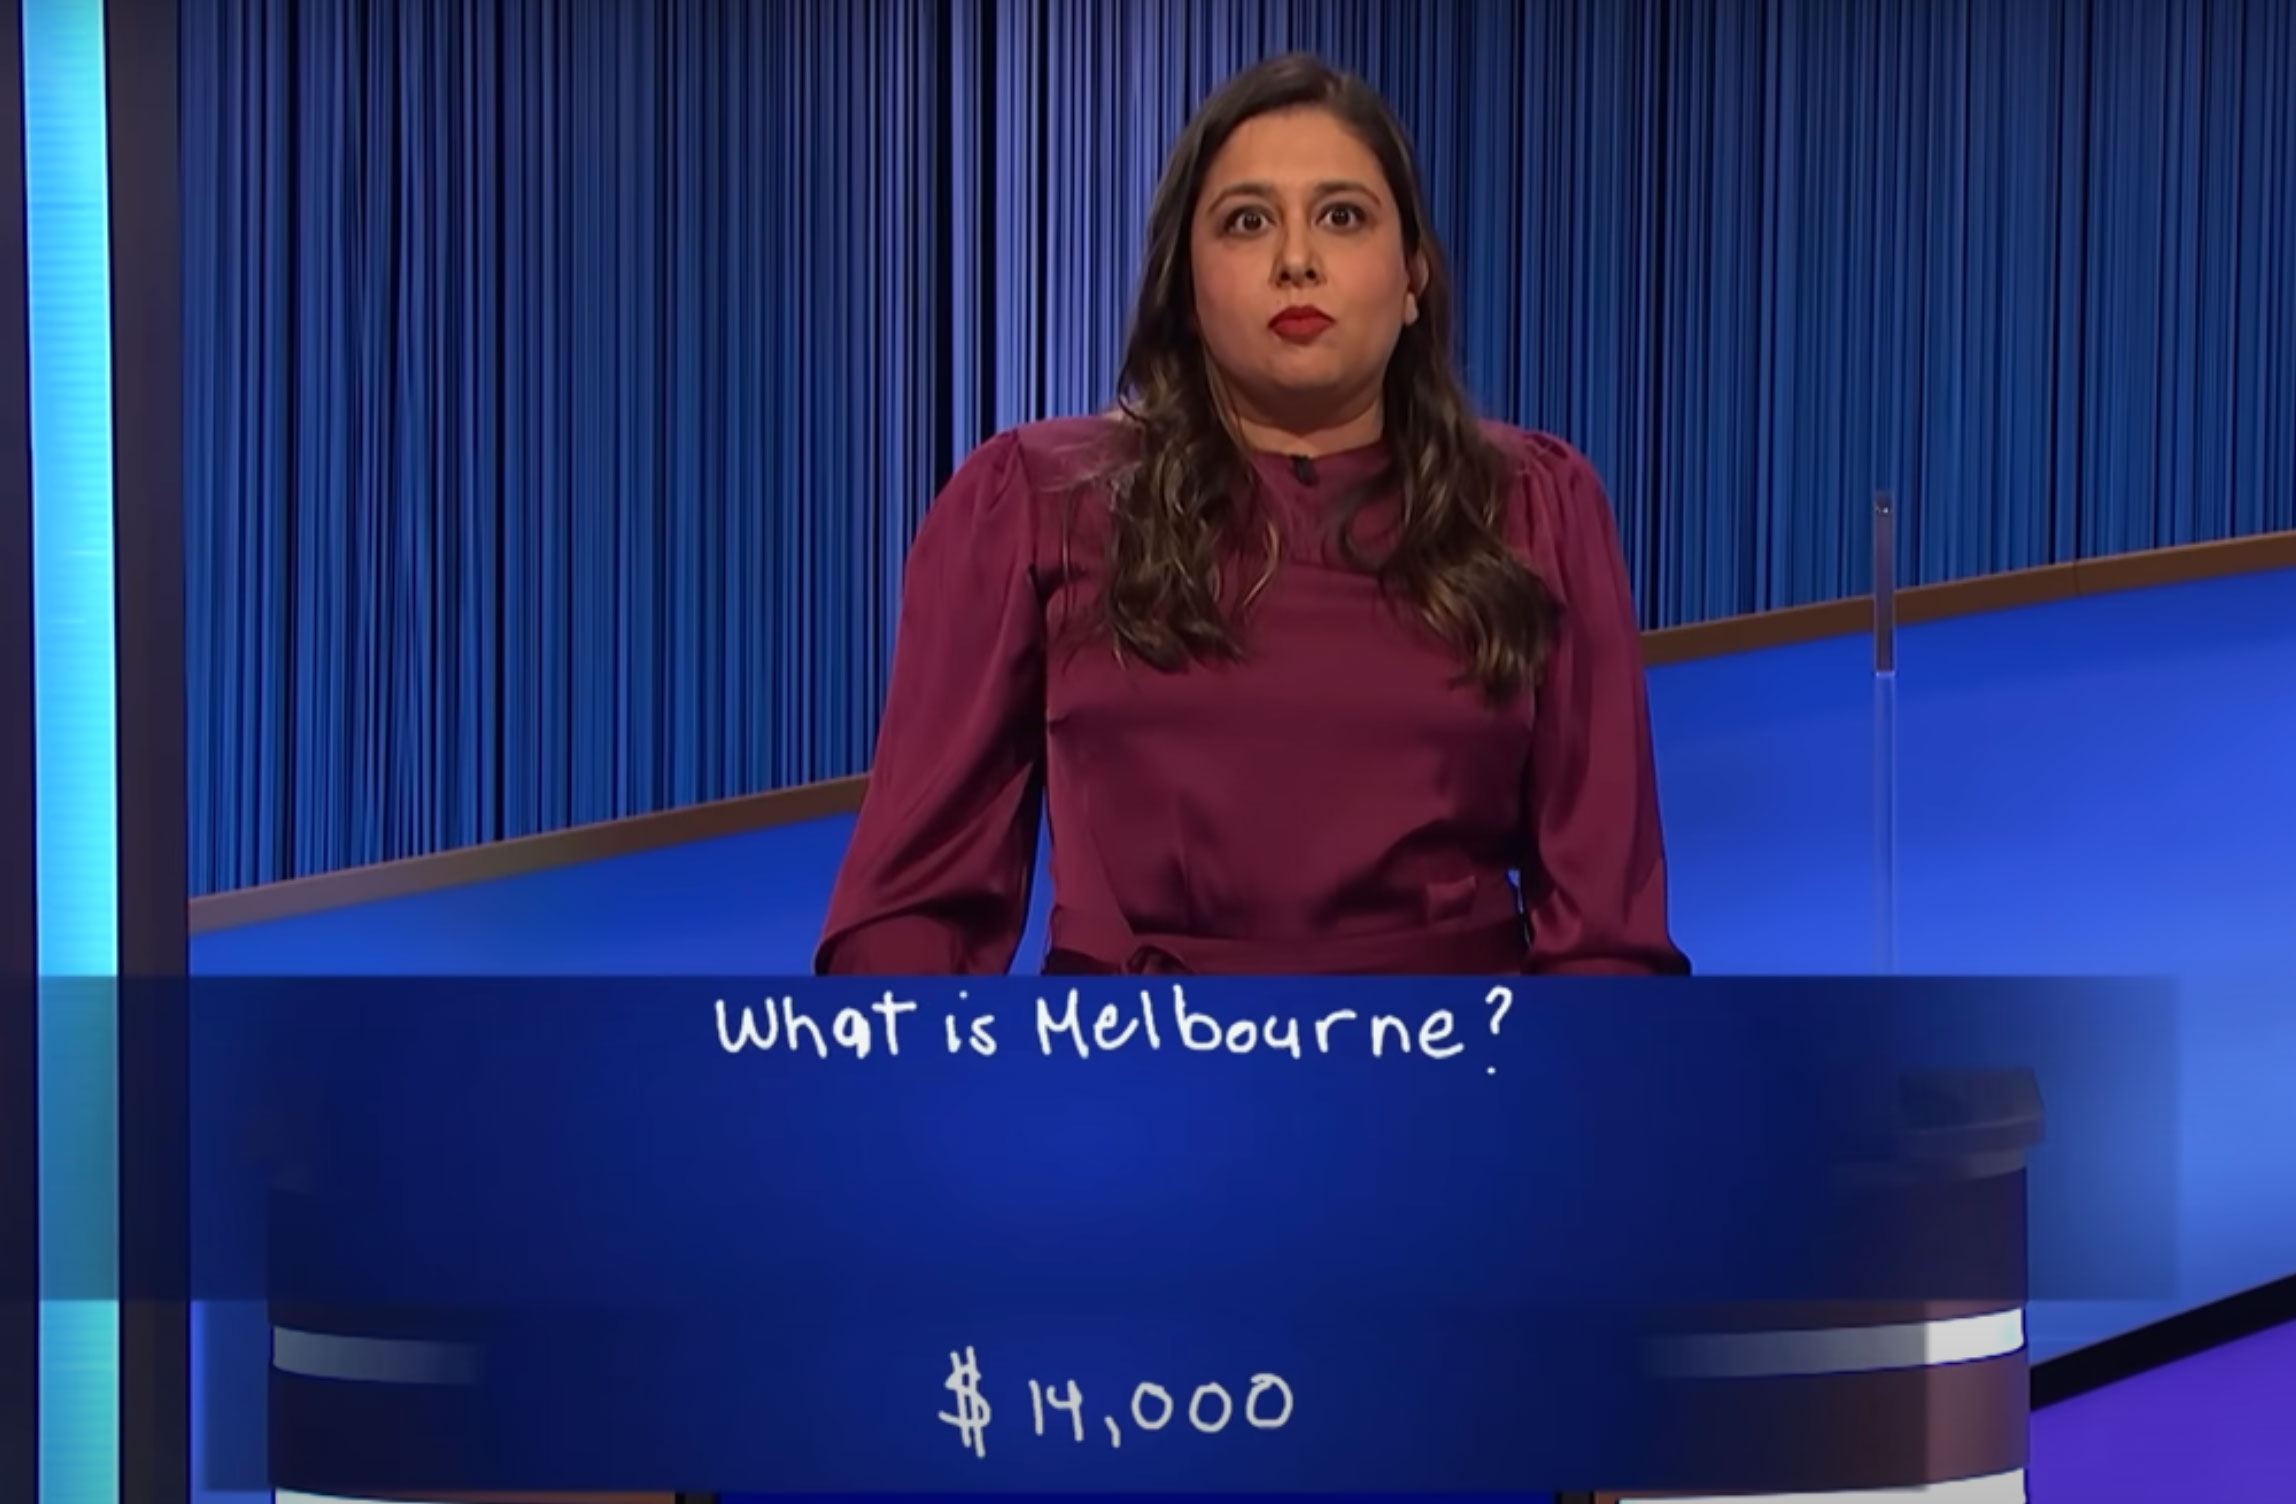 Juveria made an unwarranted Final Jeopardy move in game one as fans reacted: 'Why the hell did she wager 14,000, and 'I don't understand'